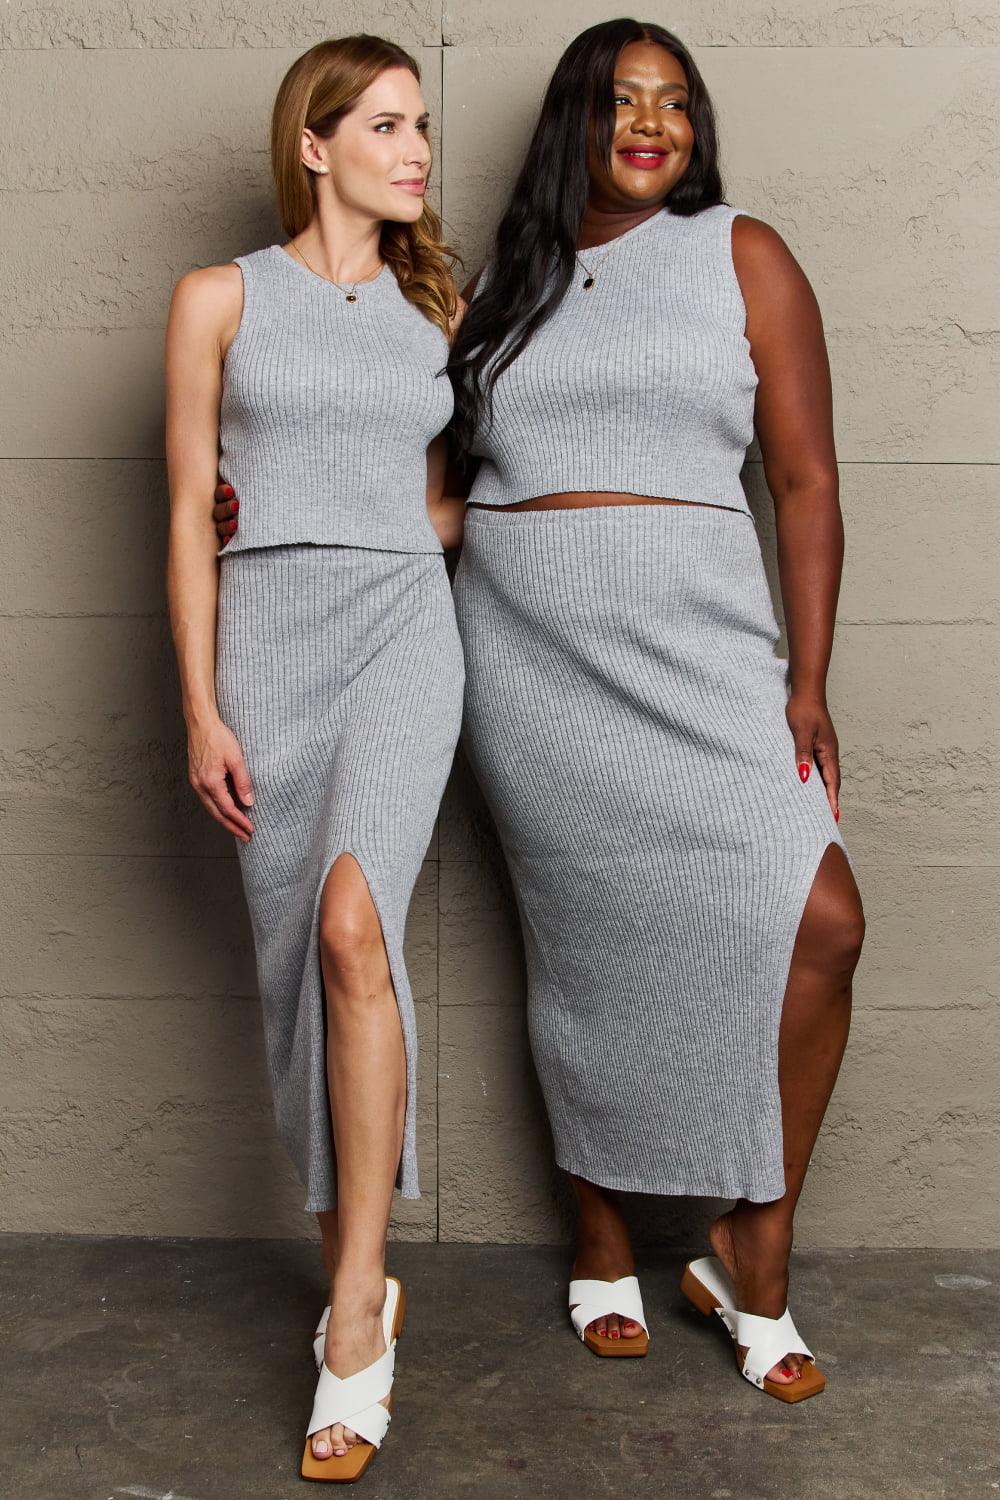 Sew In Love She's All That Fitted Two-Piece Skirt Set - SAVLUXE